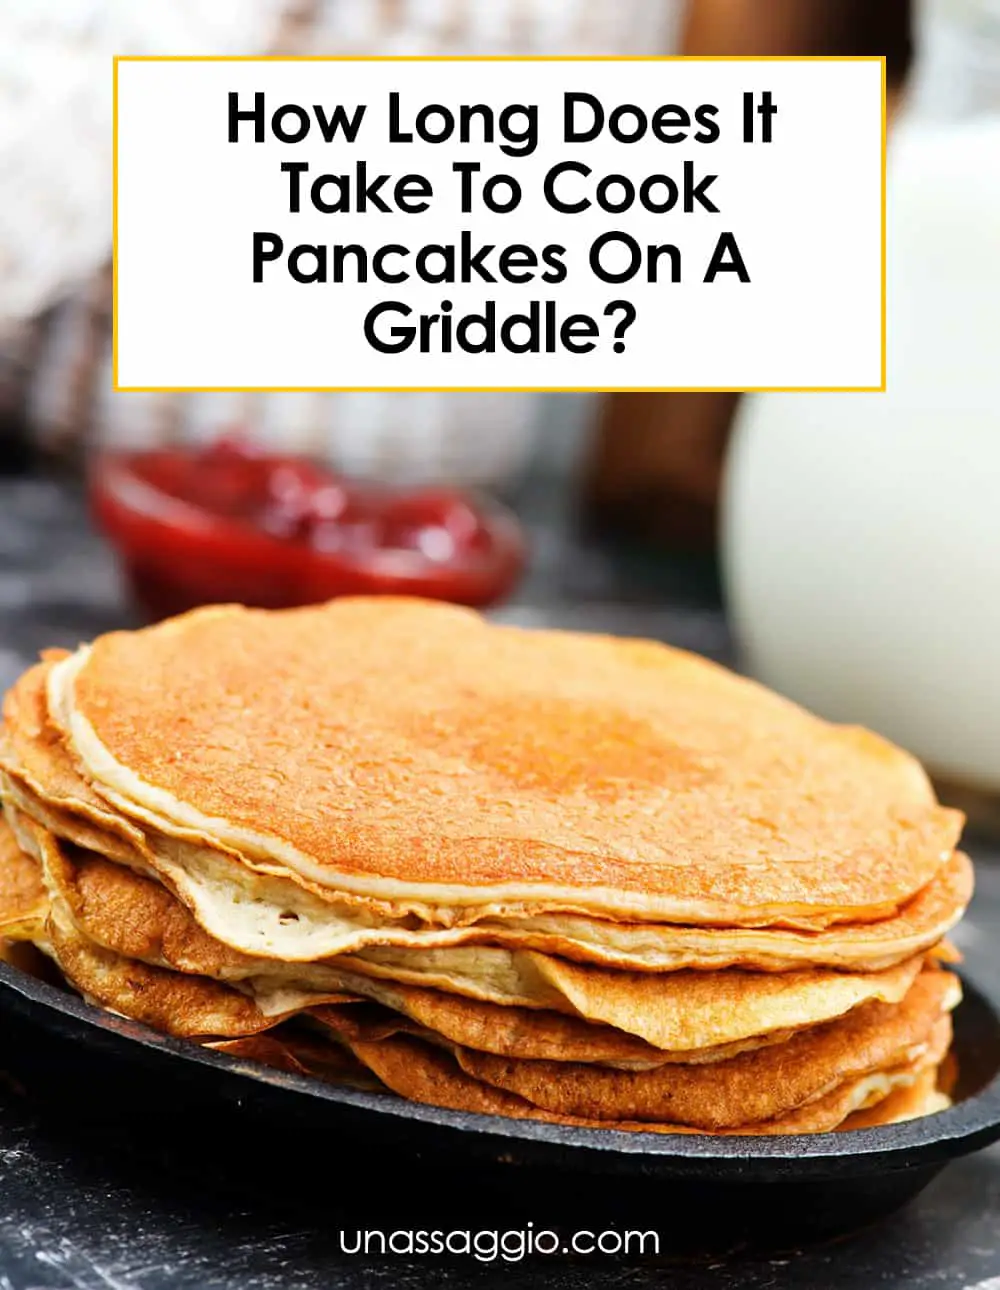 How Long Does It Take To Cook Pancakes On A Griddle